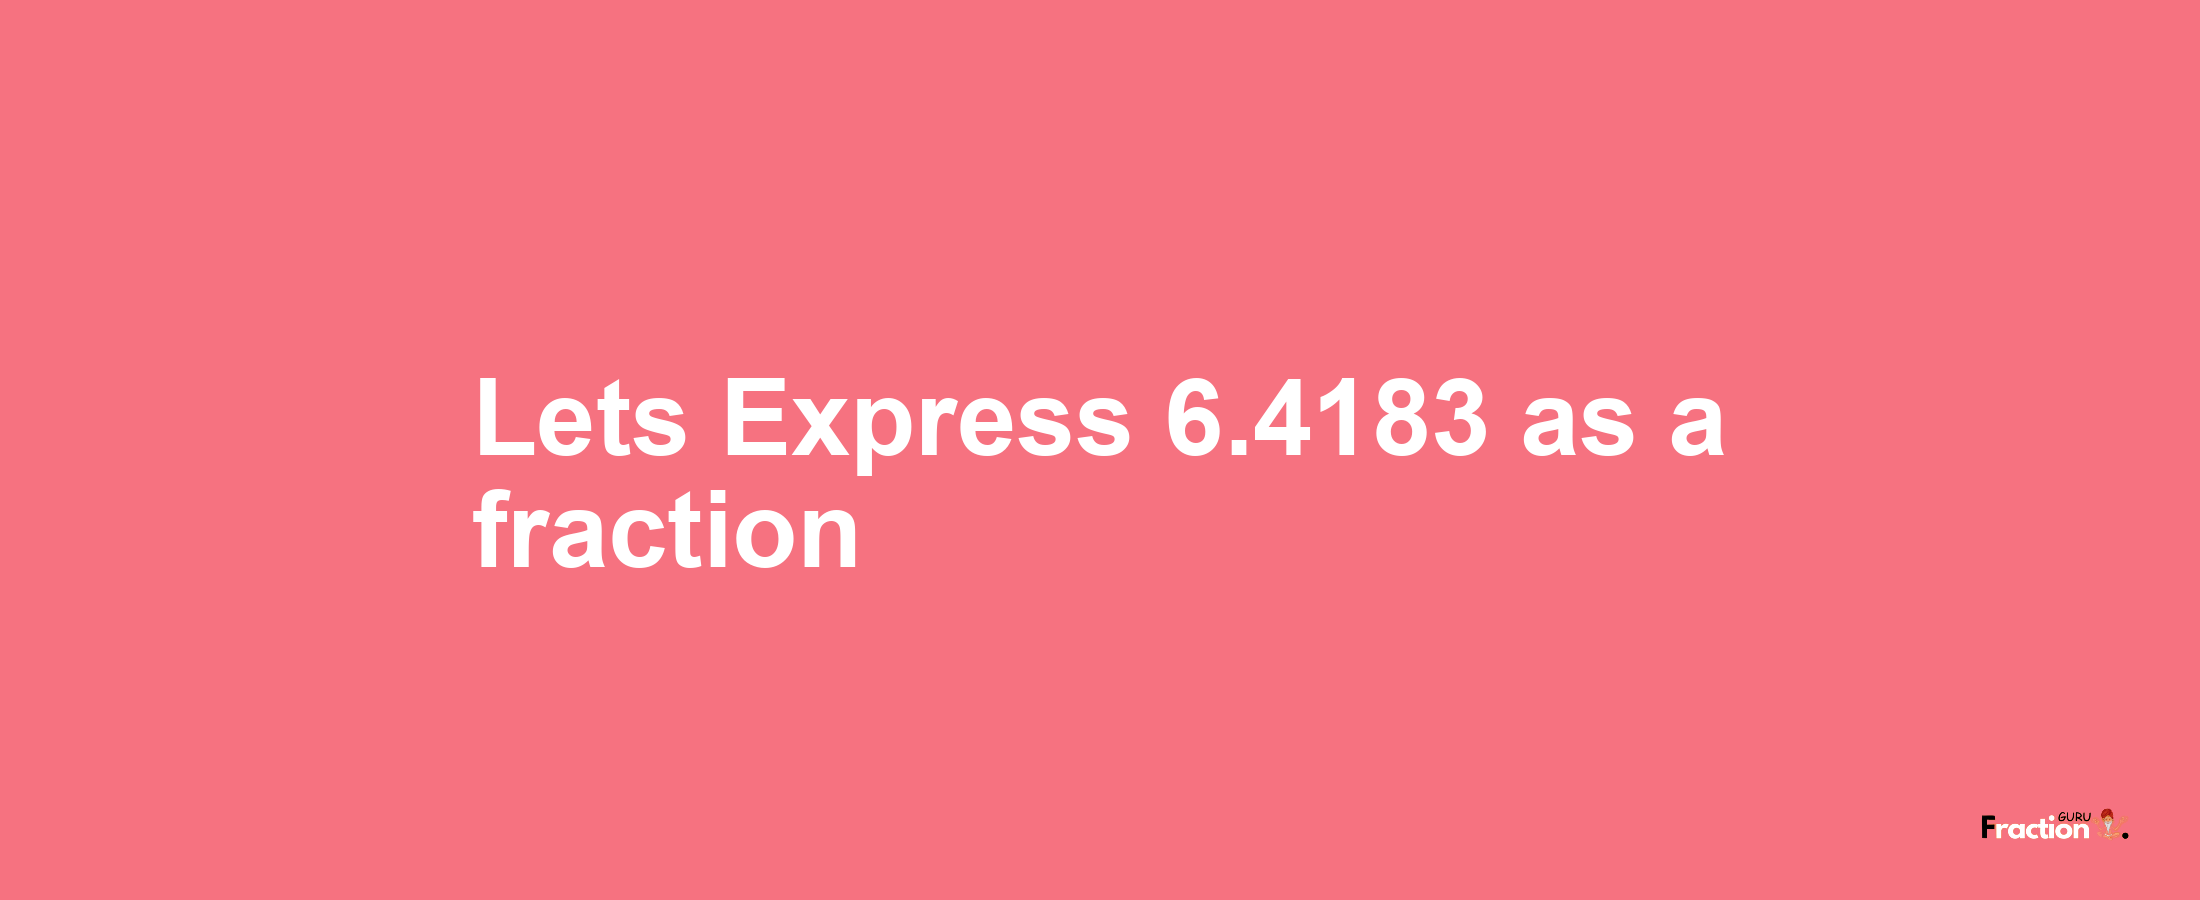 Lets Express 6.4183 as afraction